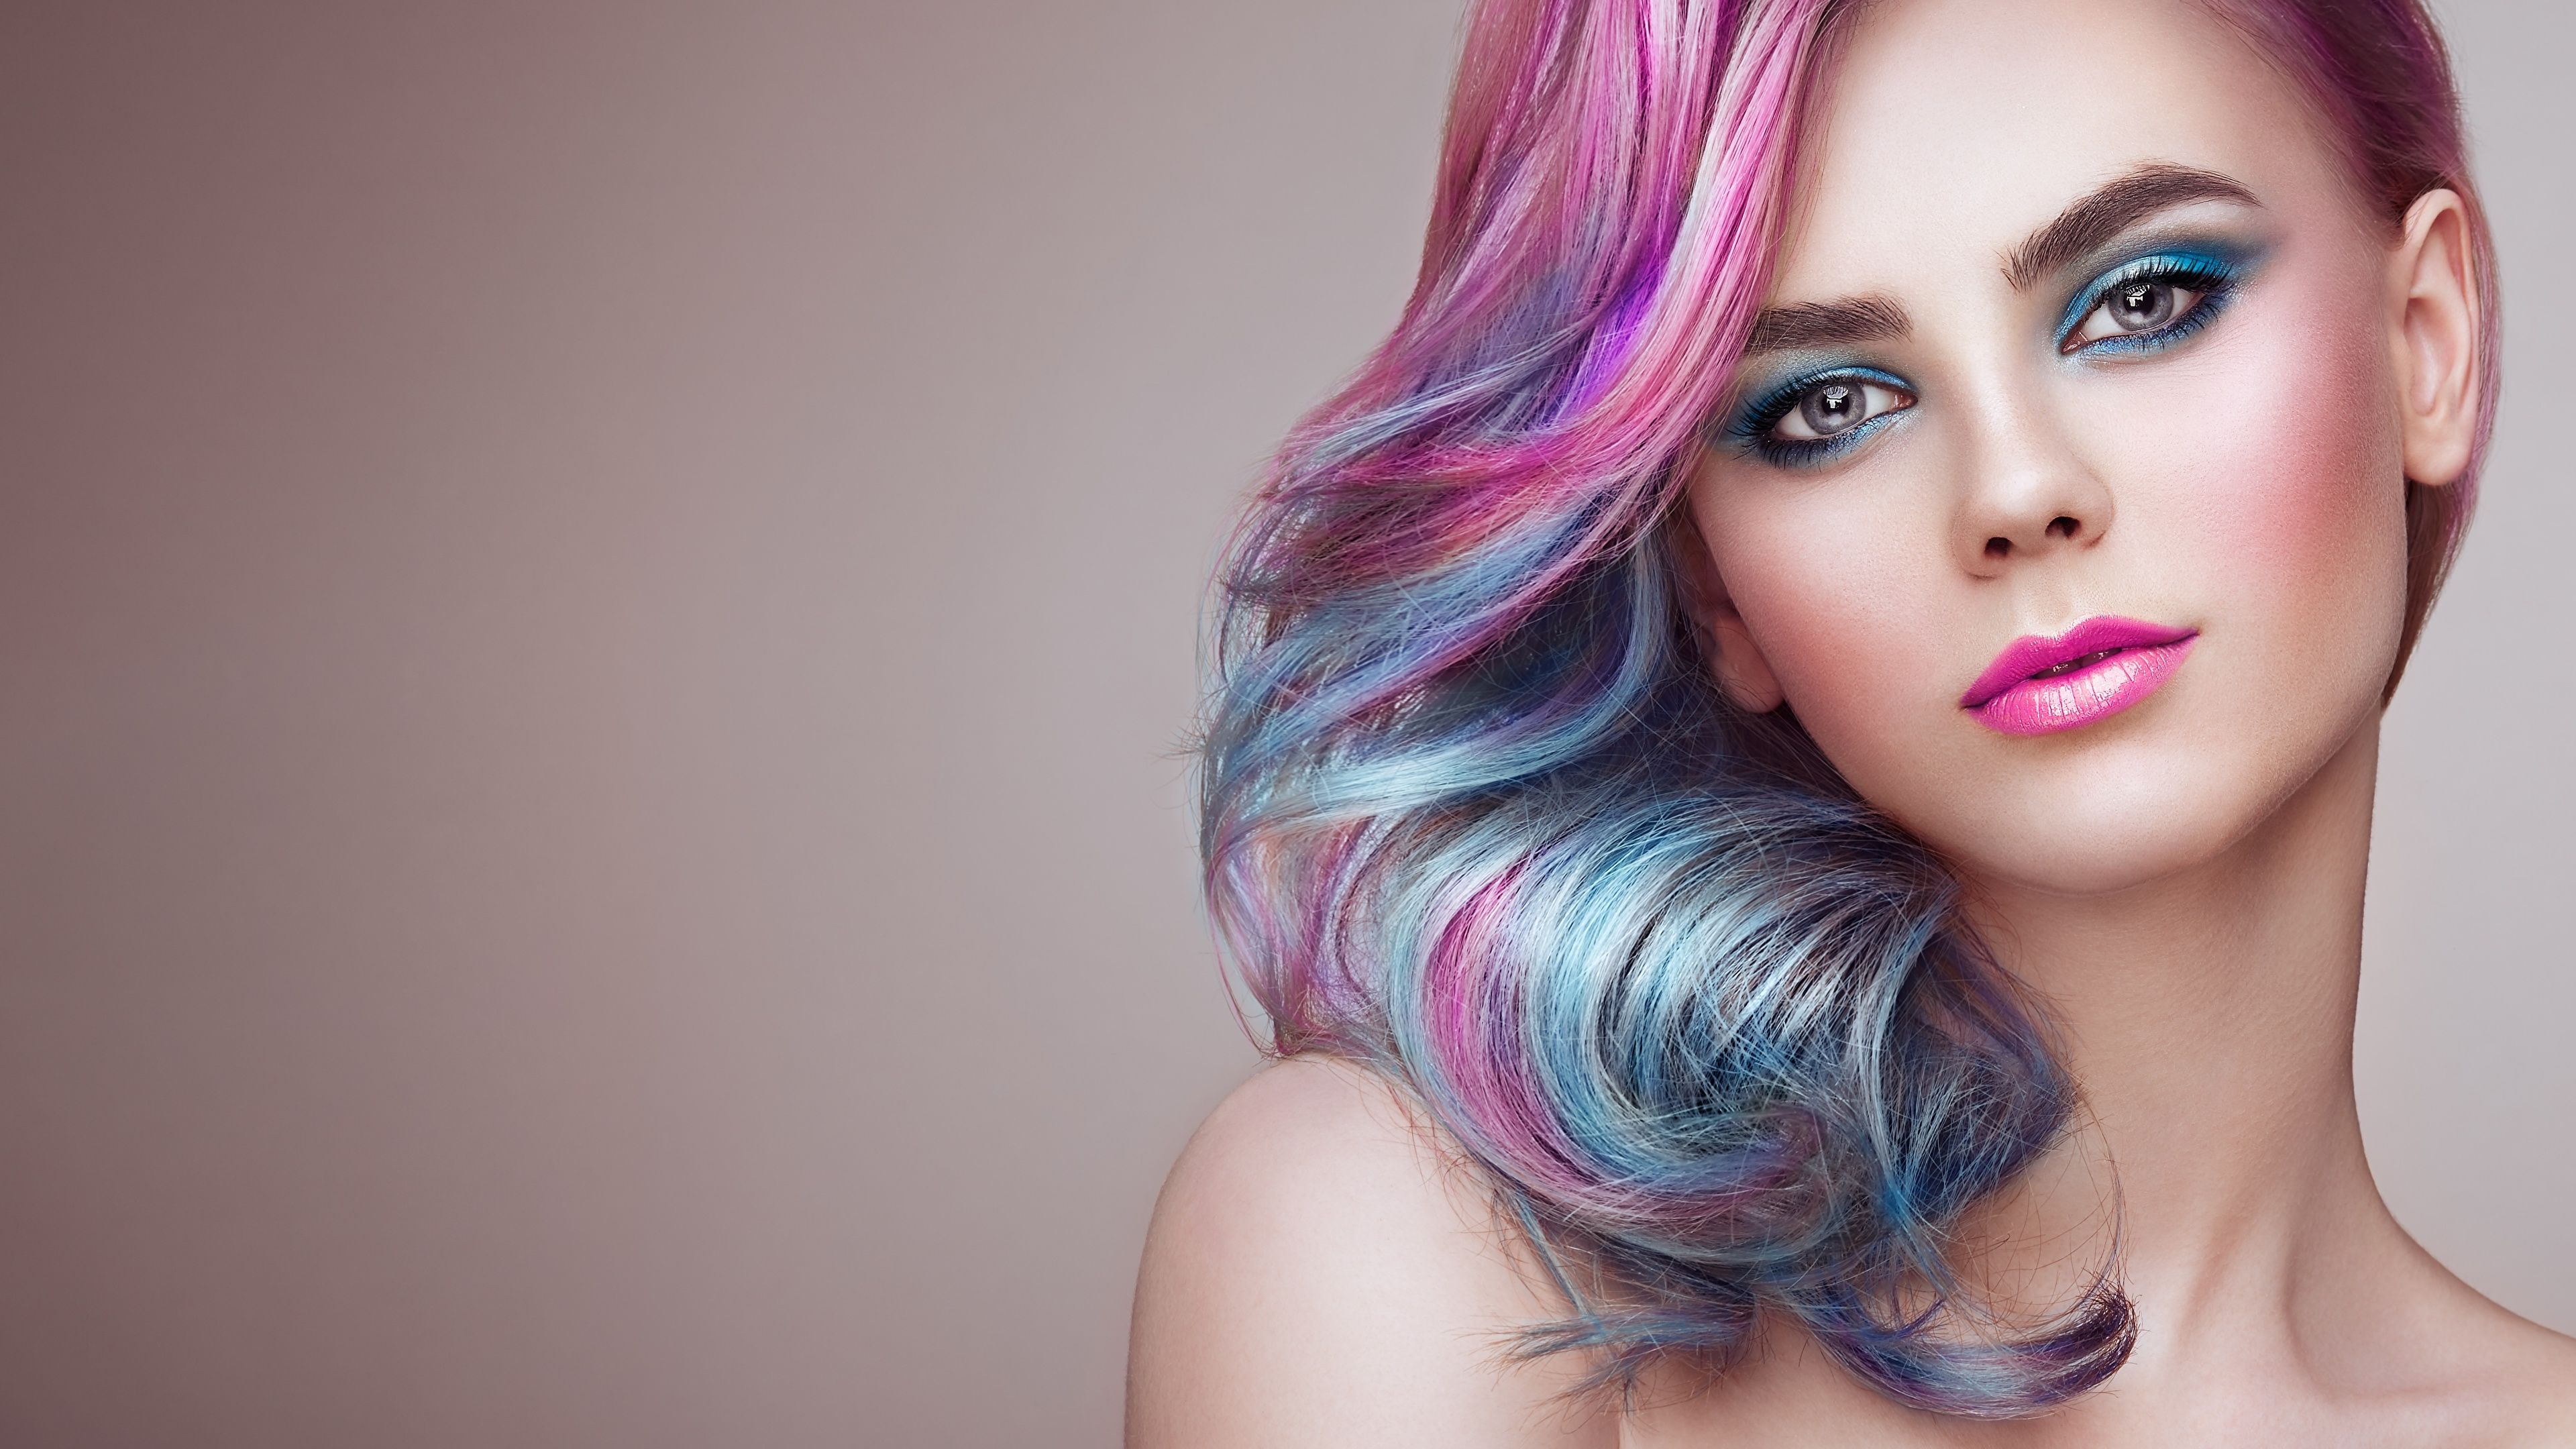 Hairstyles Wallpaper Free Hairstyles Background